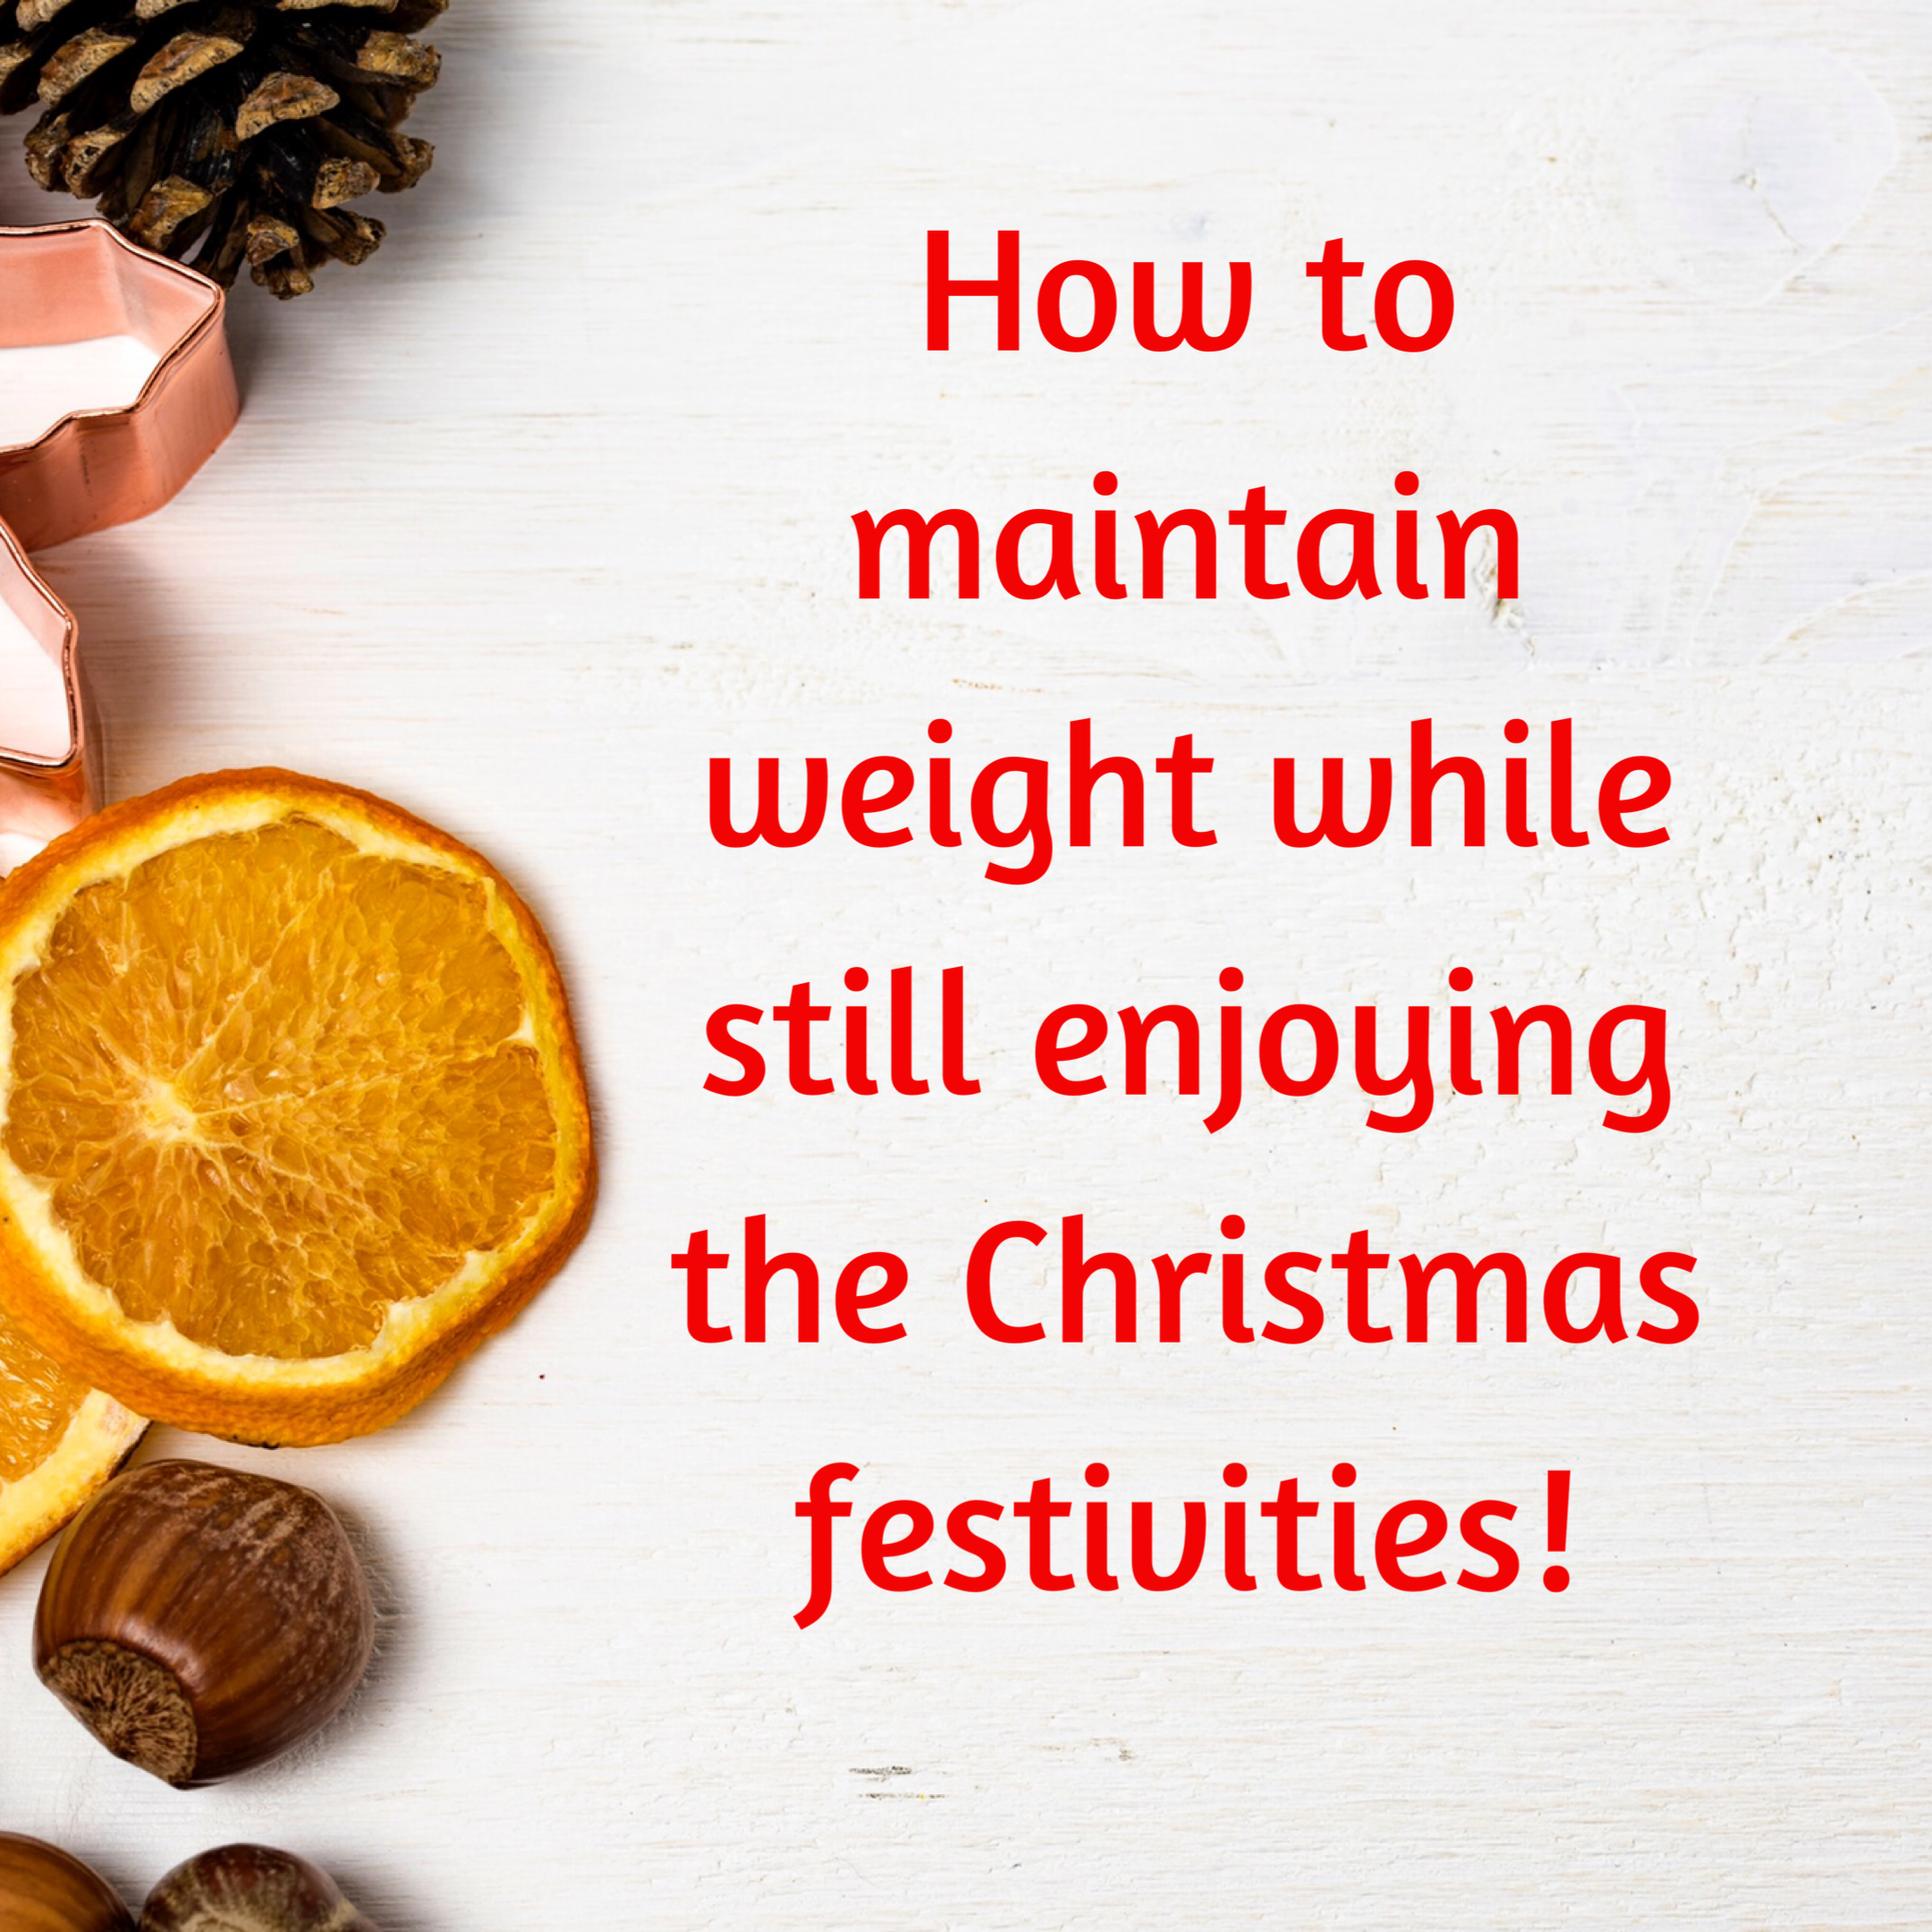 How to maintain weight while still enjoying the Christmas festivities!